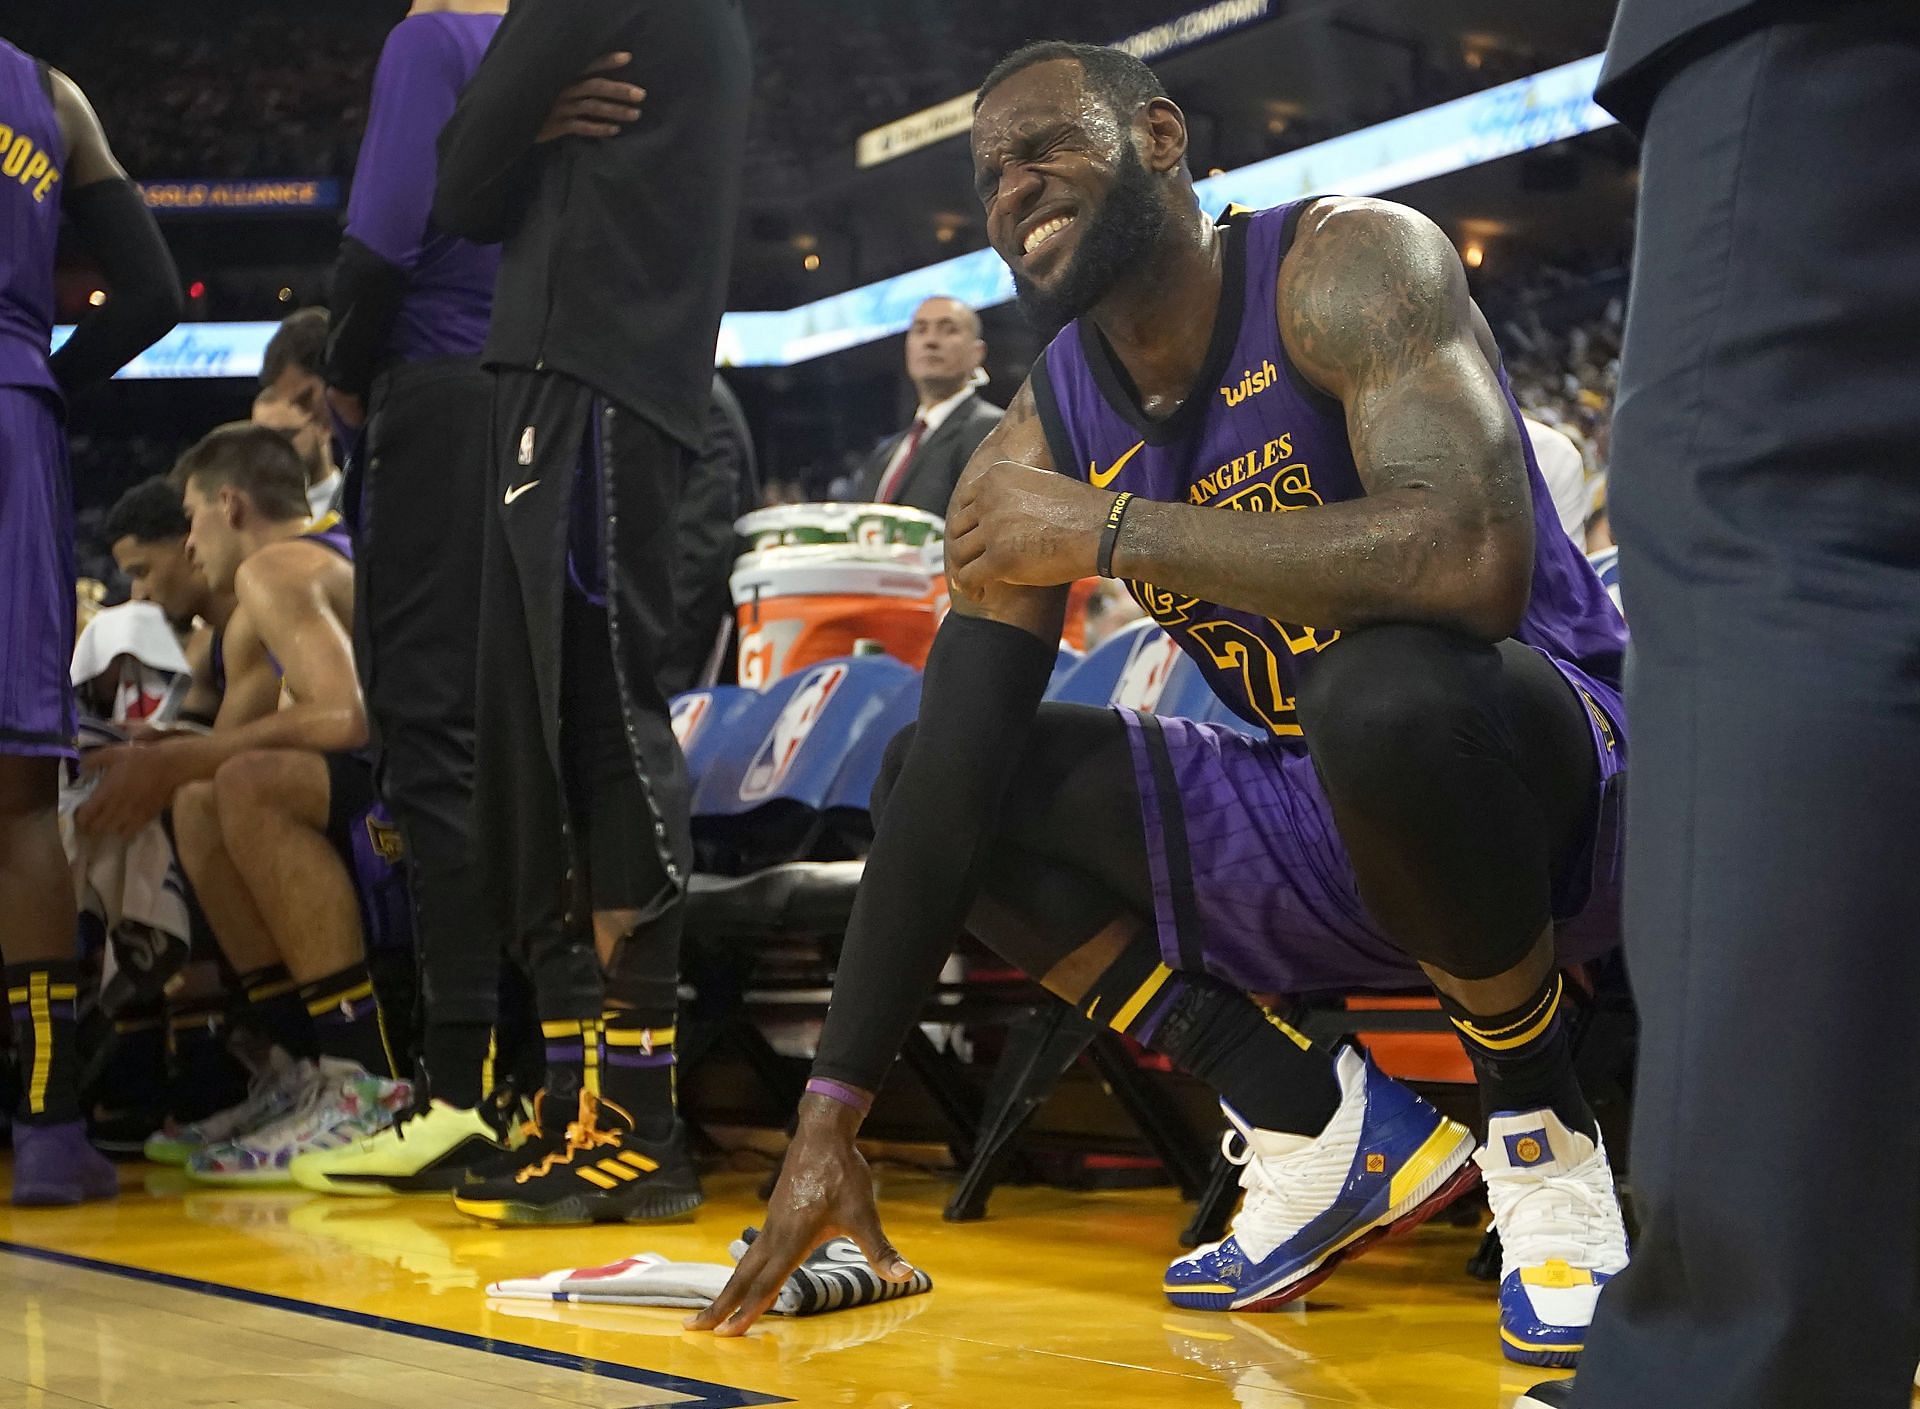 The LA Lakers are not advancing past the Golden State Warriors or the Phoenix Suns without a healthy LeBron James [Photo: The Denver Post]